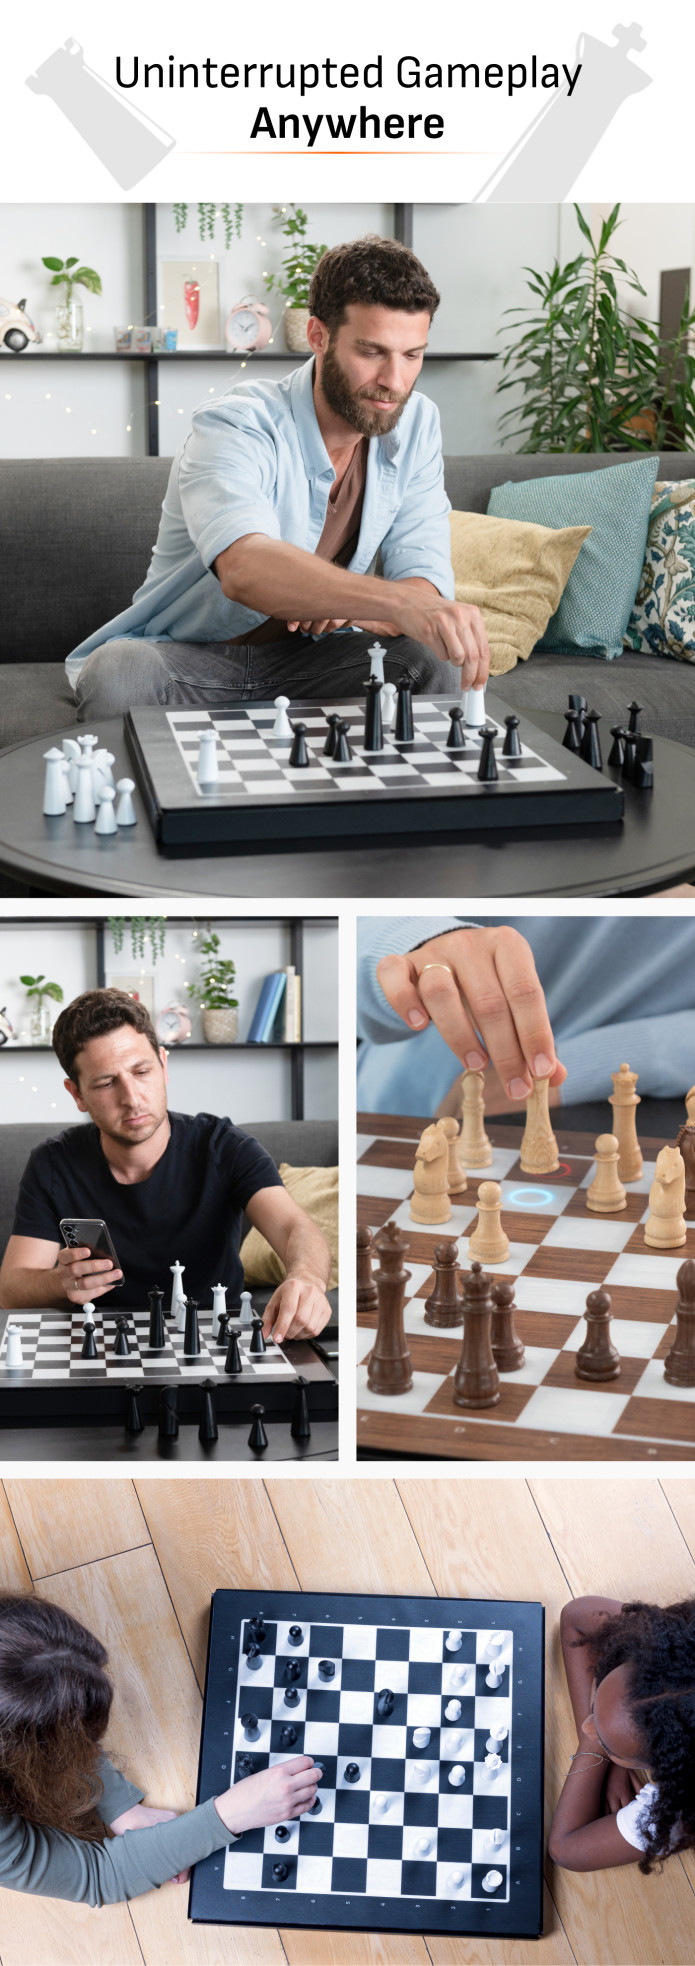 GoChess: Most Powerful Chess Board Ever Invented